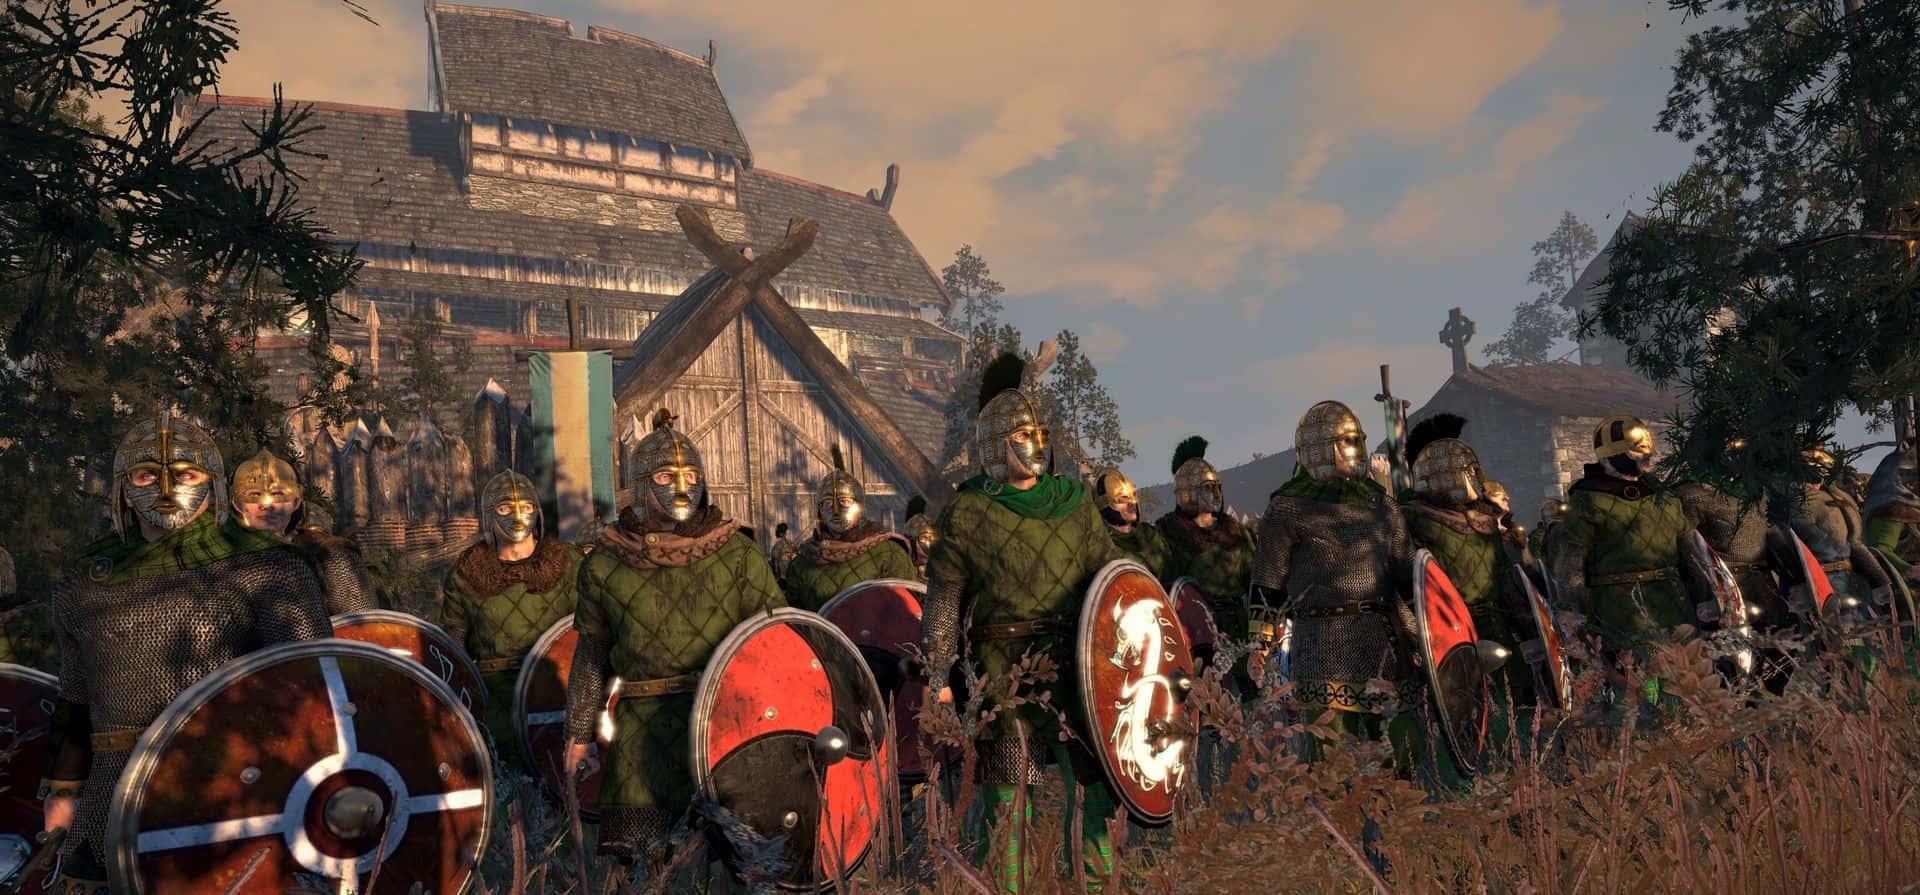 A Group Of Men In Armor Are Standing In A Field Wallpaper